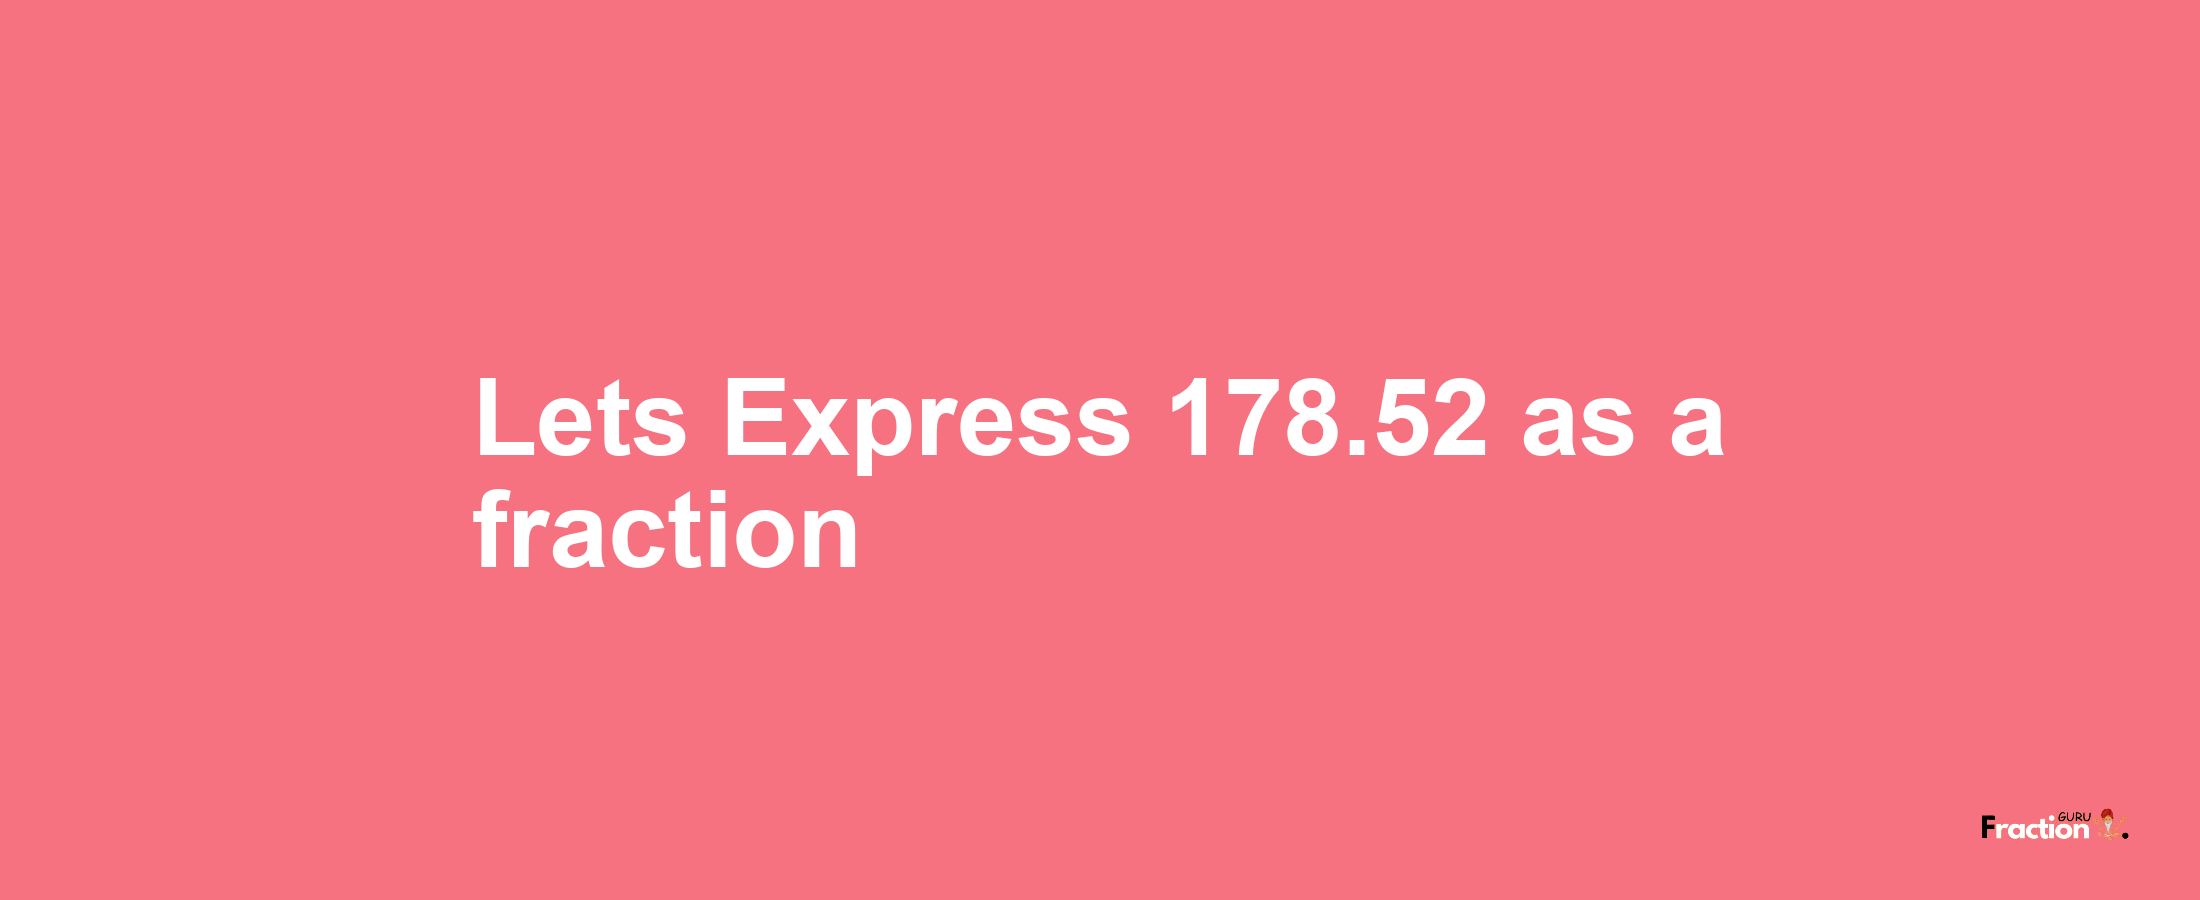 Lets Express 178.52 as afraction